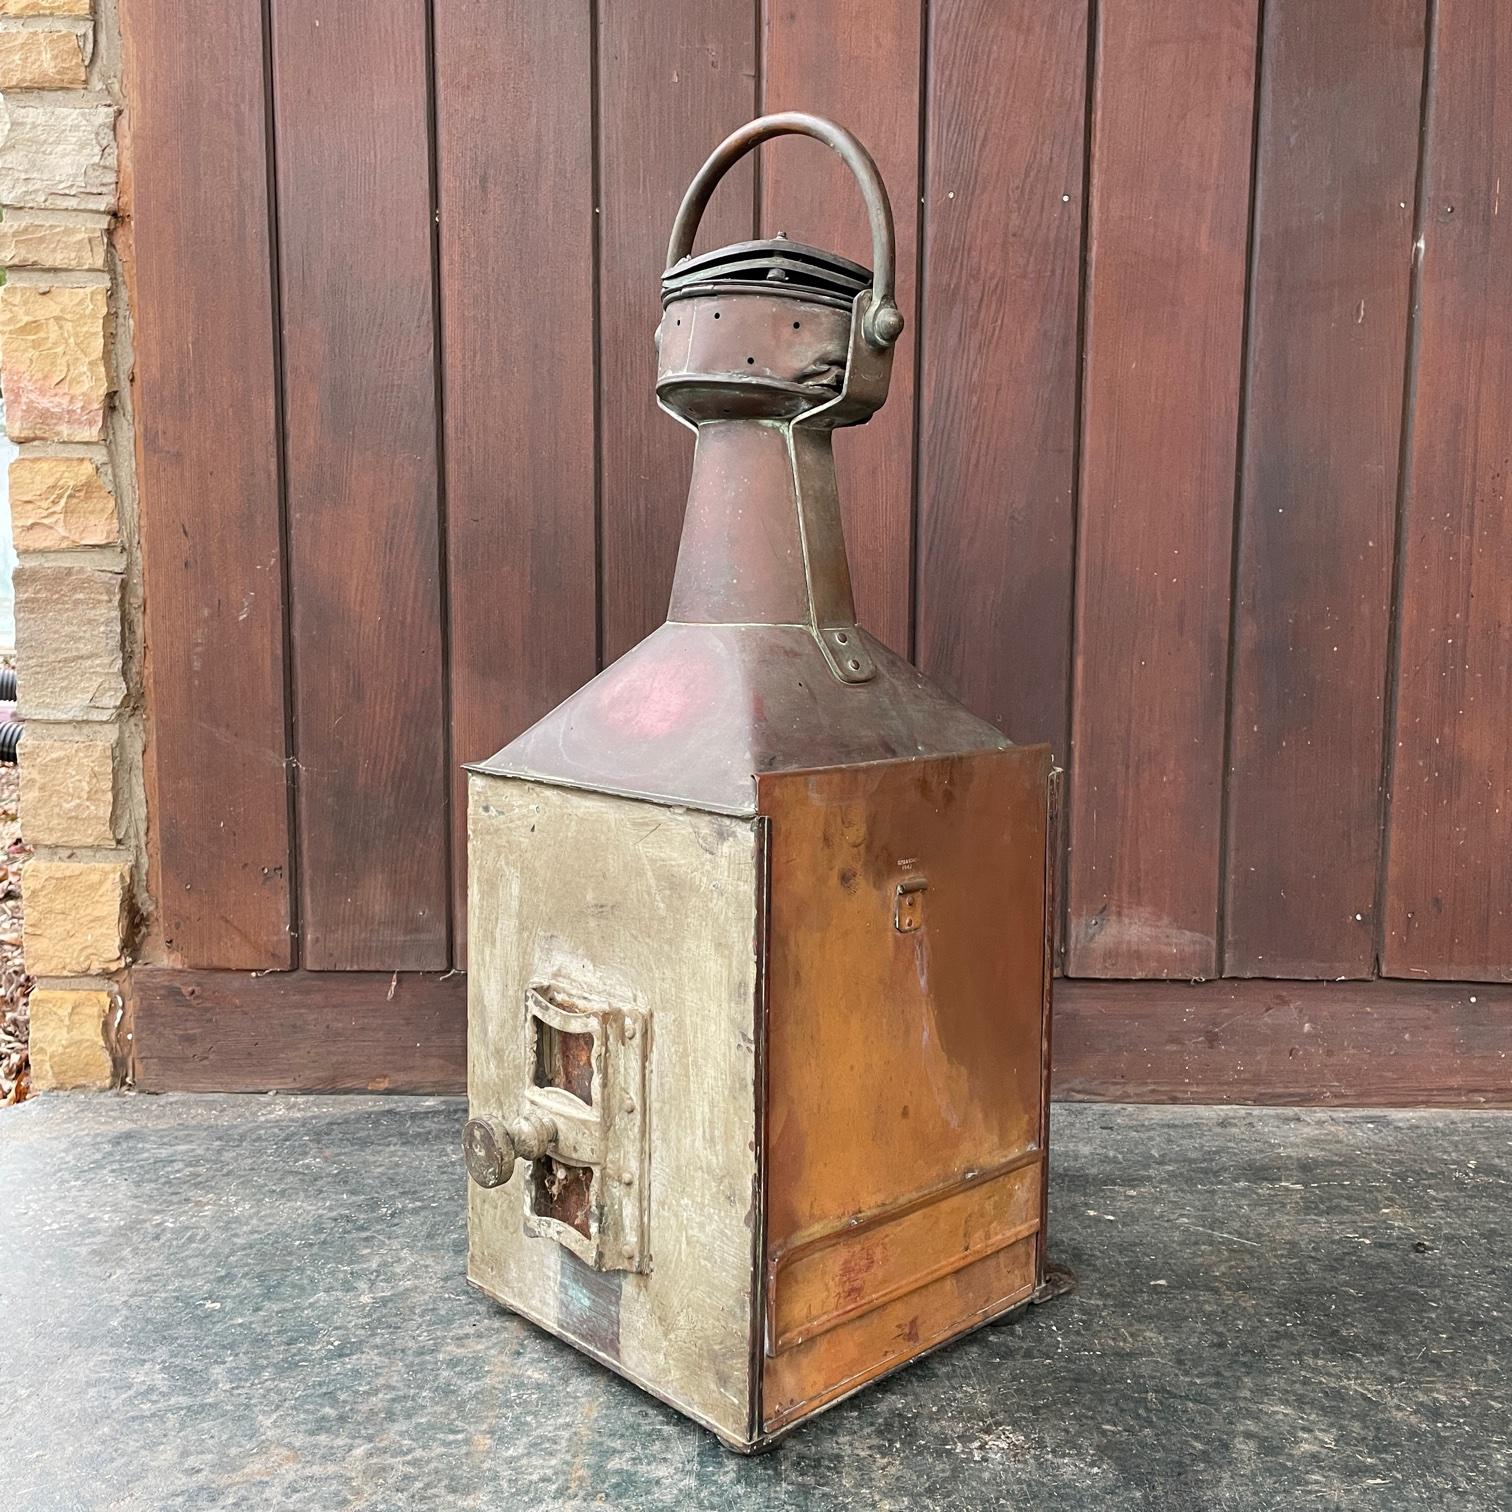 Rare to be presented in unmolested and unpolished condition. No electric light source, would need this to be added.

A Large C.P.G. & Sons STARBOARD copper and brass ships lantern with fresnel lens, marked, C.P.G. & Sons 1942. With inner blue